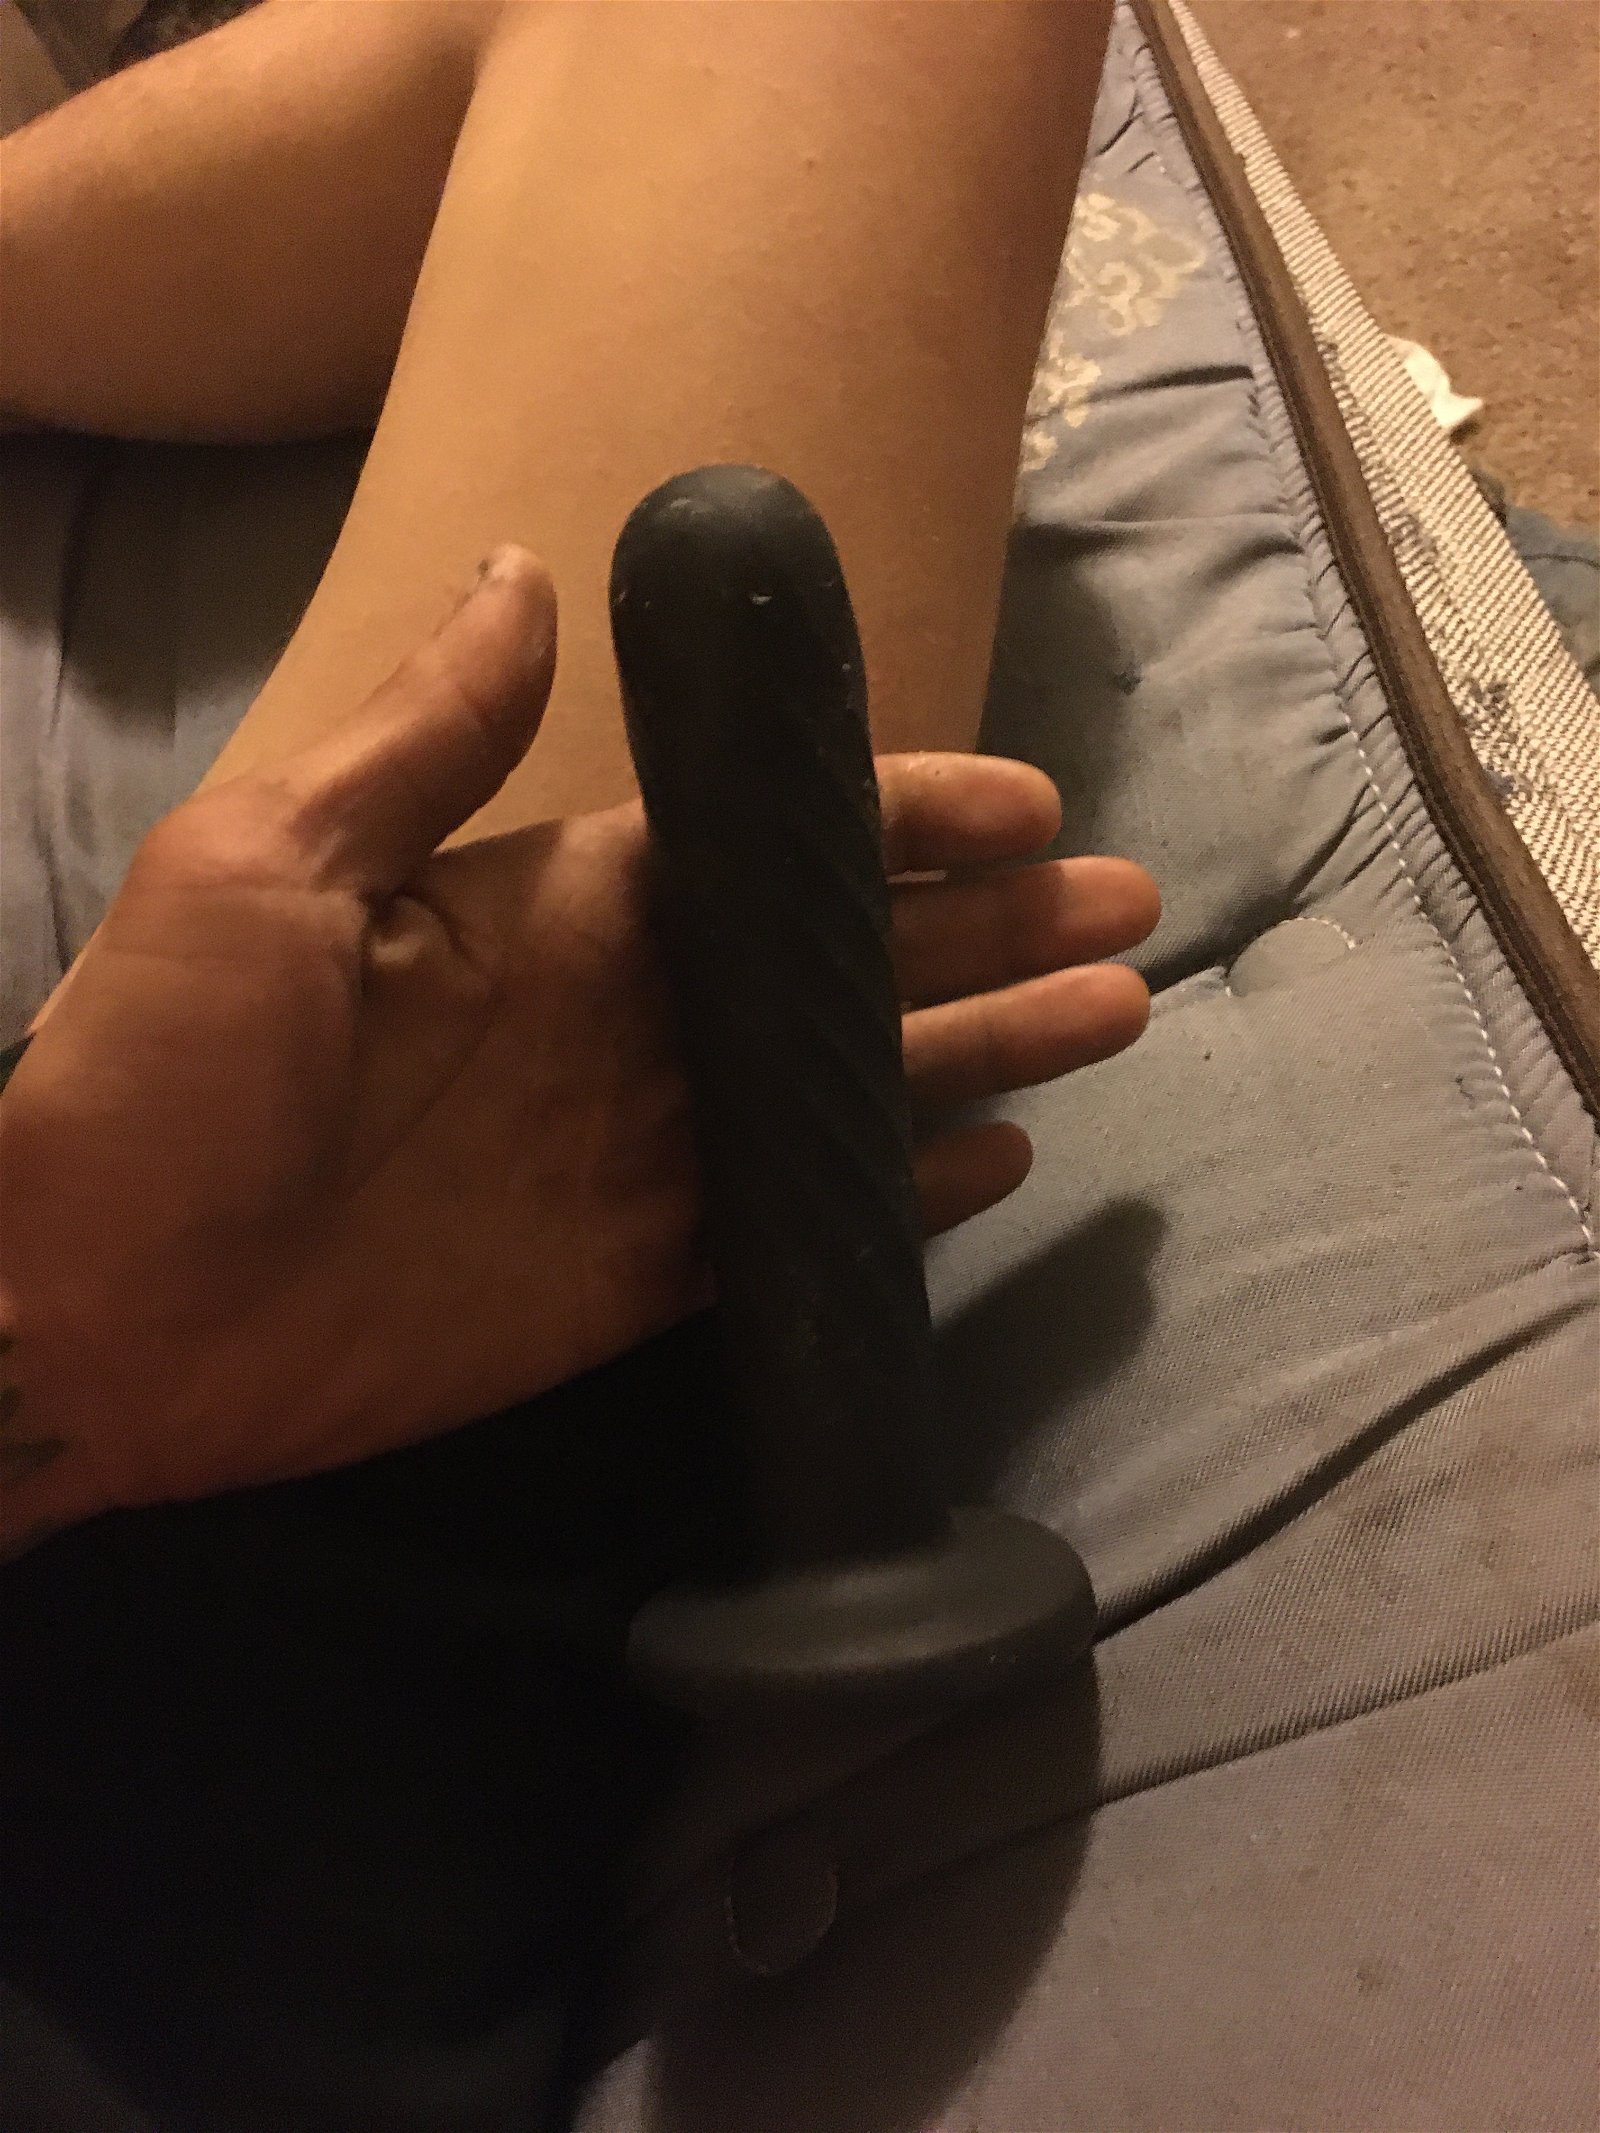 Photo by Shackleford with the username @Shackleford,  November 13, 2020 at 11:03 AM. The post is about the topic Dildos and the text says 'would anyone like to see this inside me'